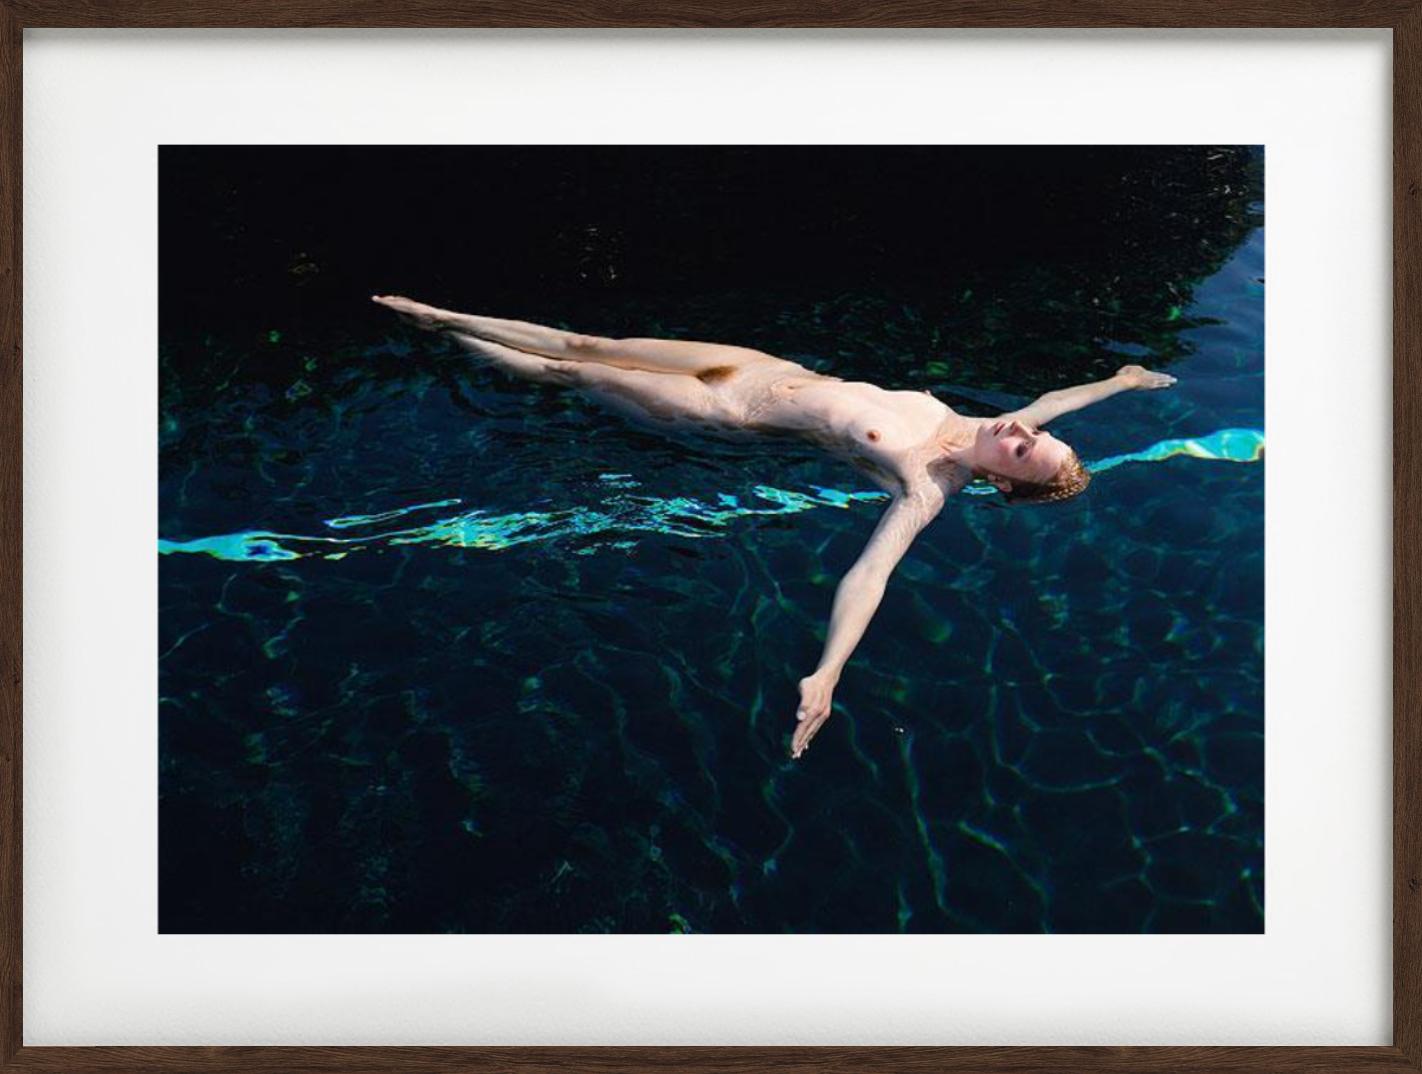 Anonymous Nude I - nude floating in water, fine art photography, 1999 - Photograph by Michel Comte